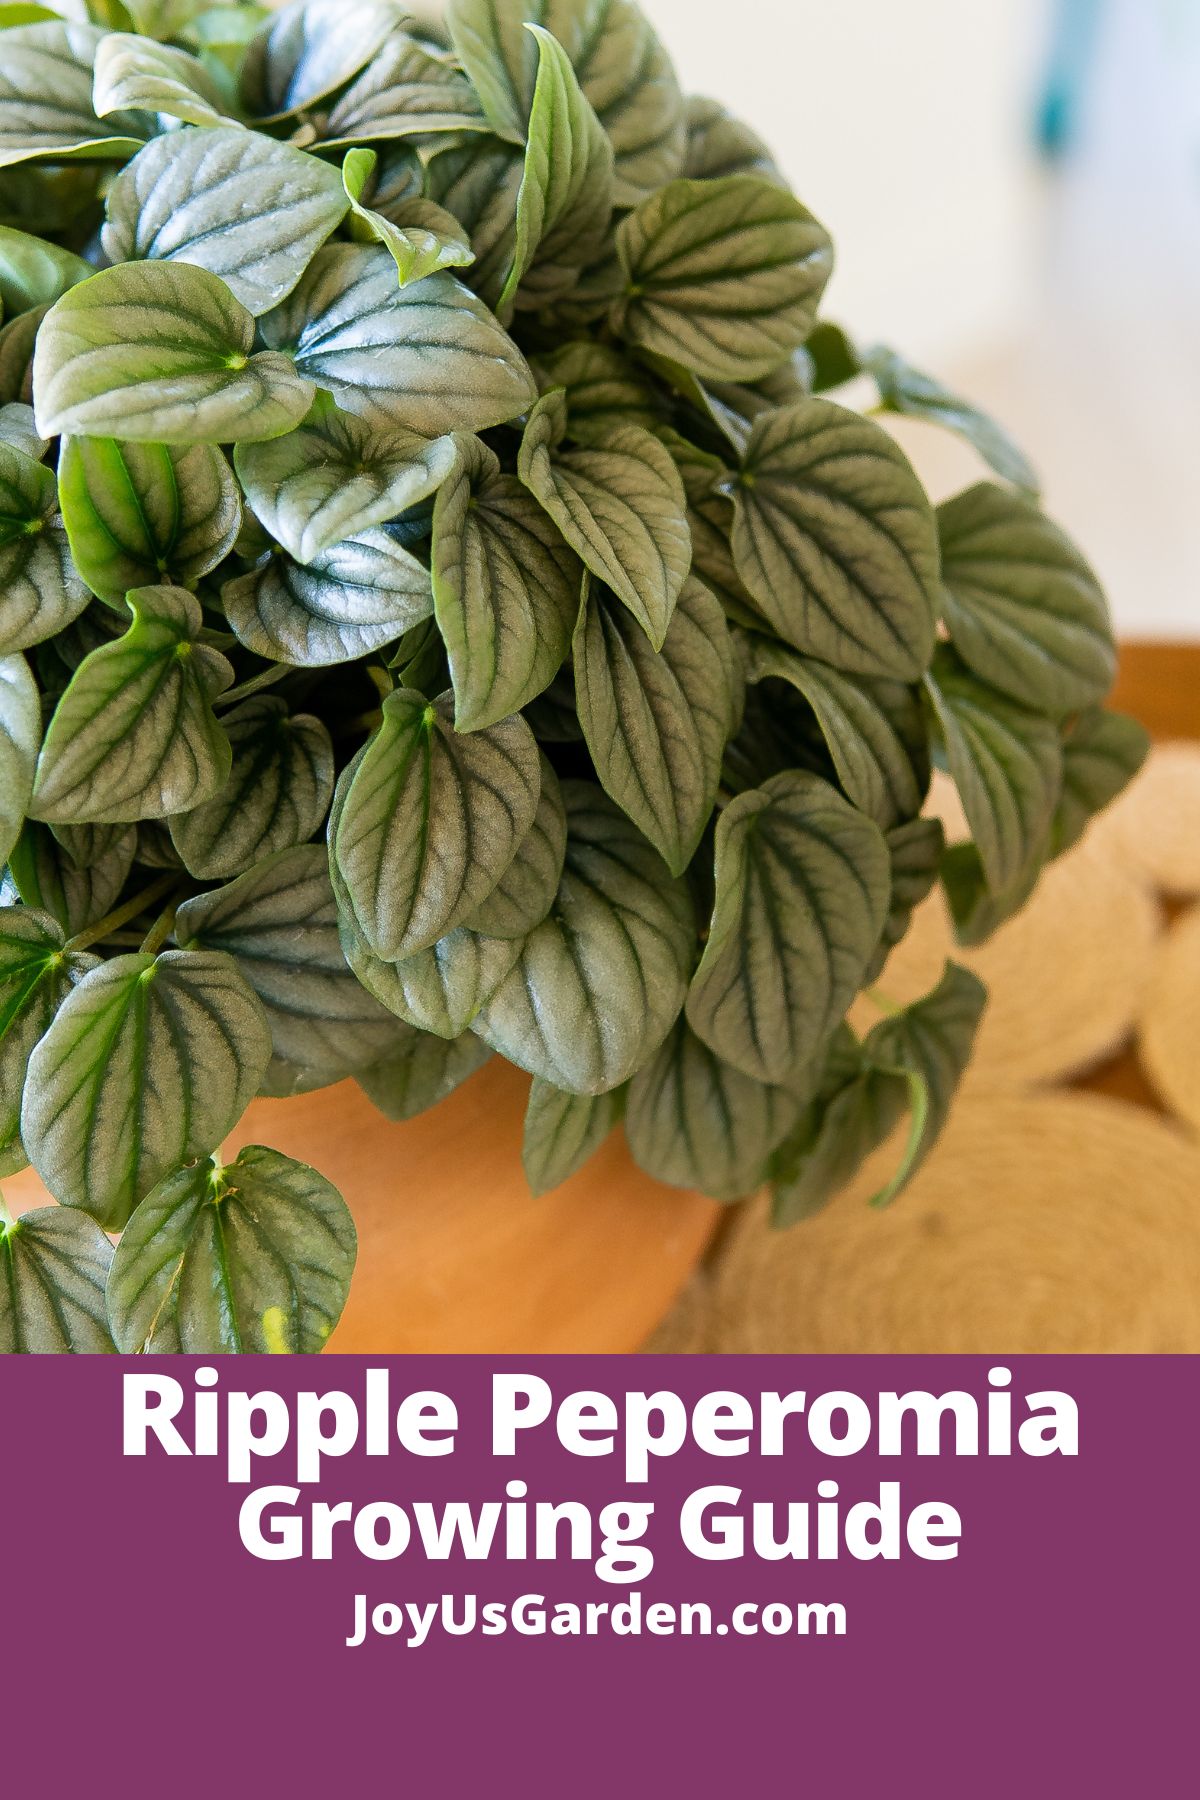 close up of ripple peperomia in clay pot on table text reads ripple peperomia growing guide joyusgarden.com